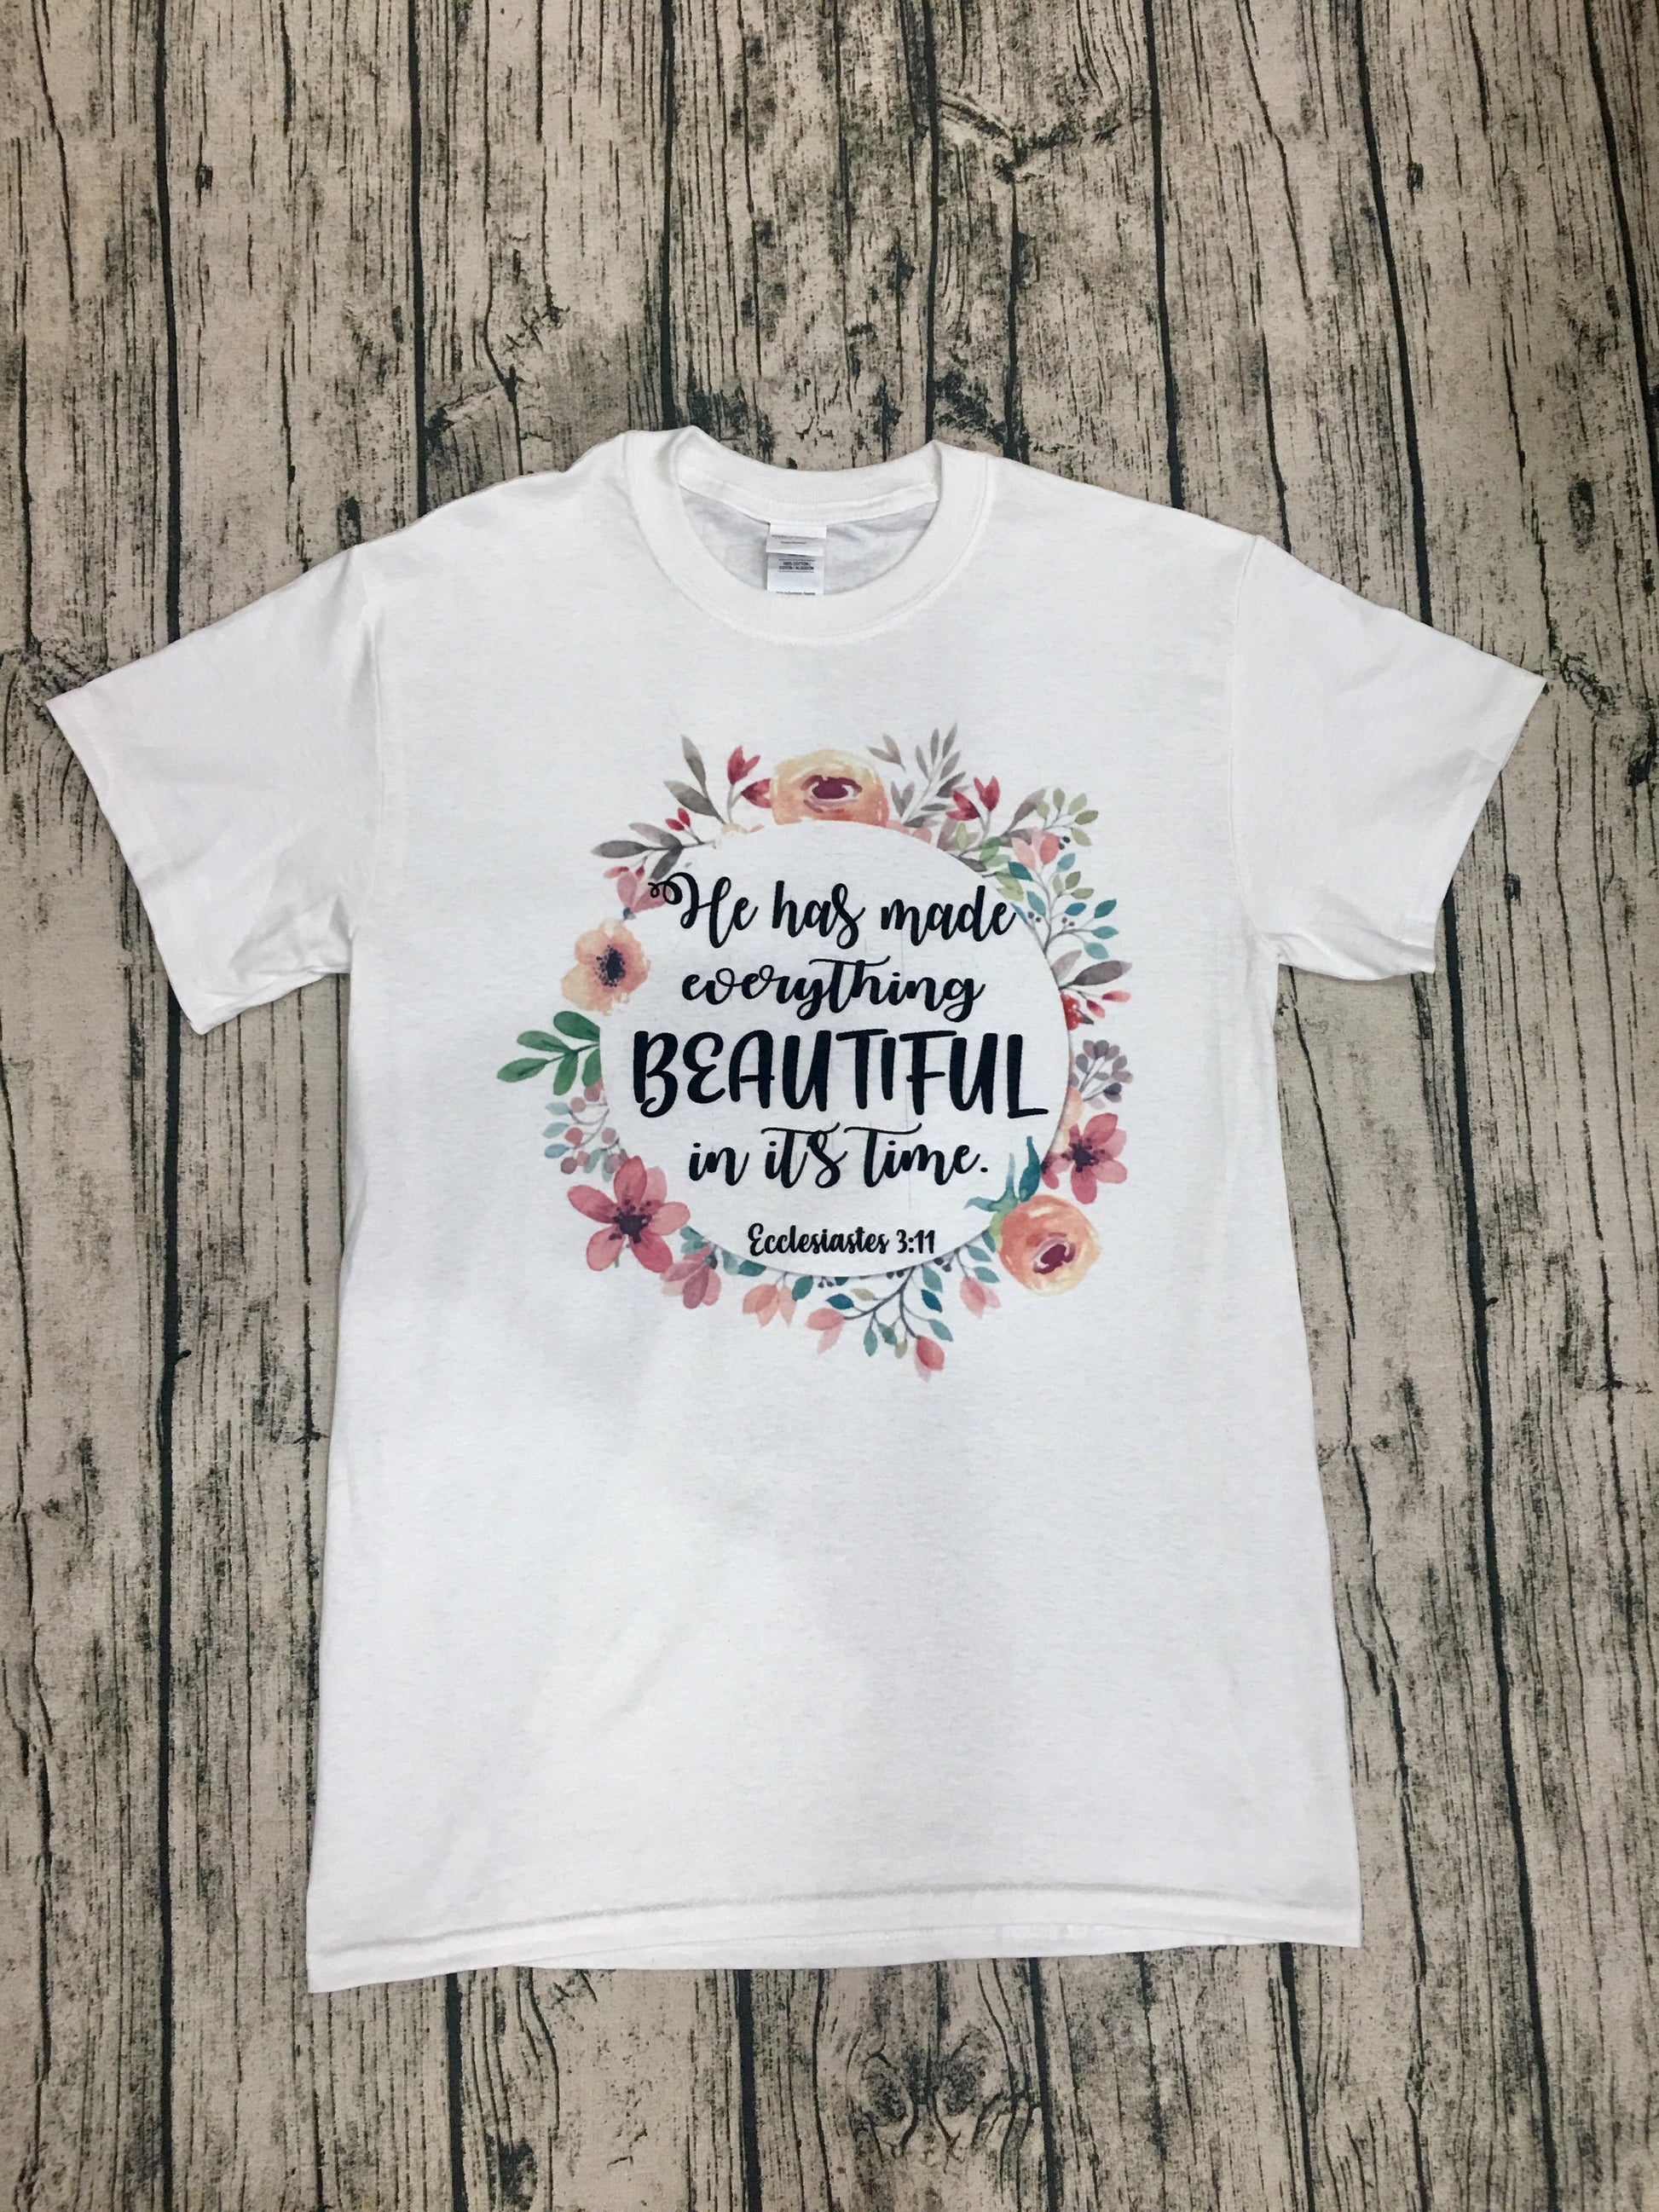 “He has made everything beautiful in its time” Ecclesiastes 3:11 - White Short Sleeve Tee - Southern Grace Creations